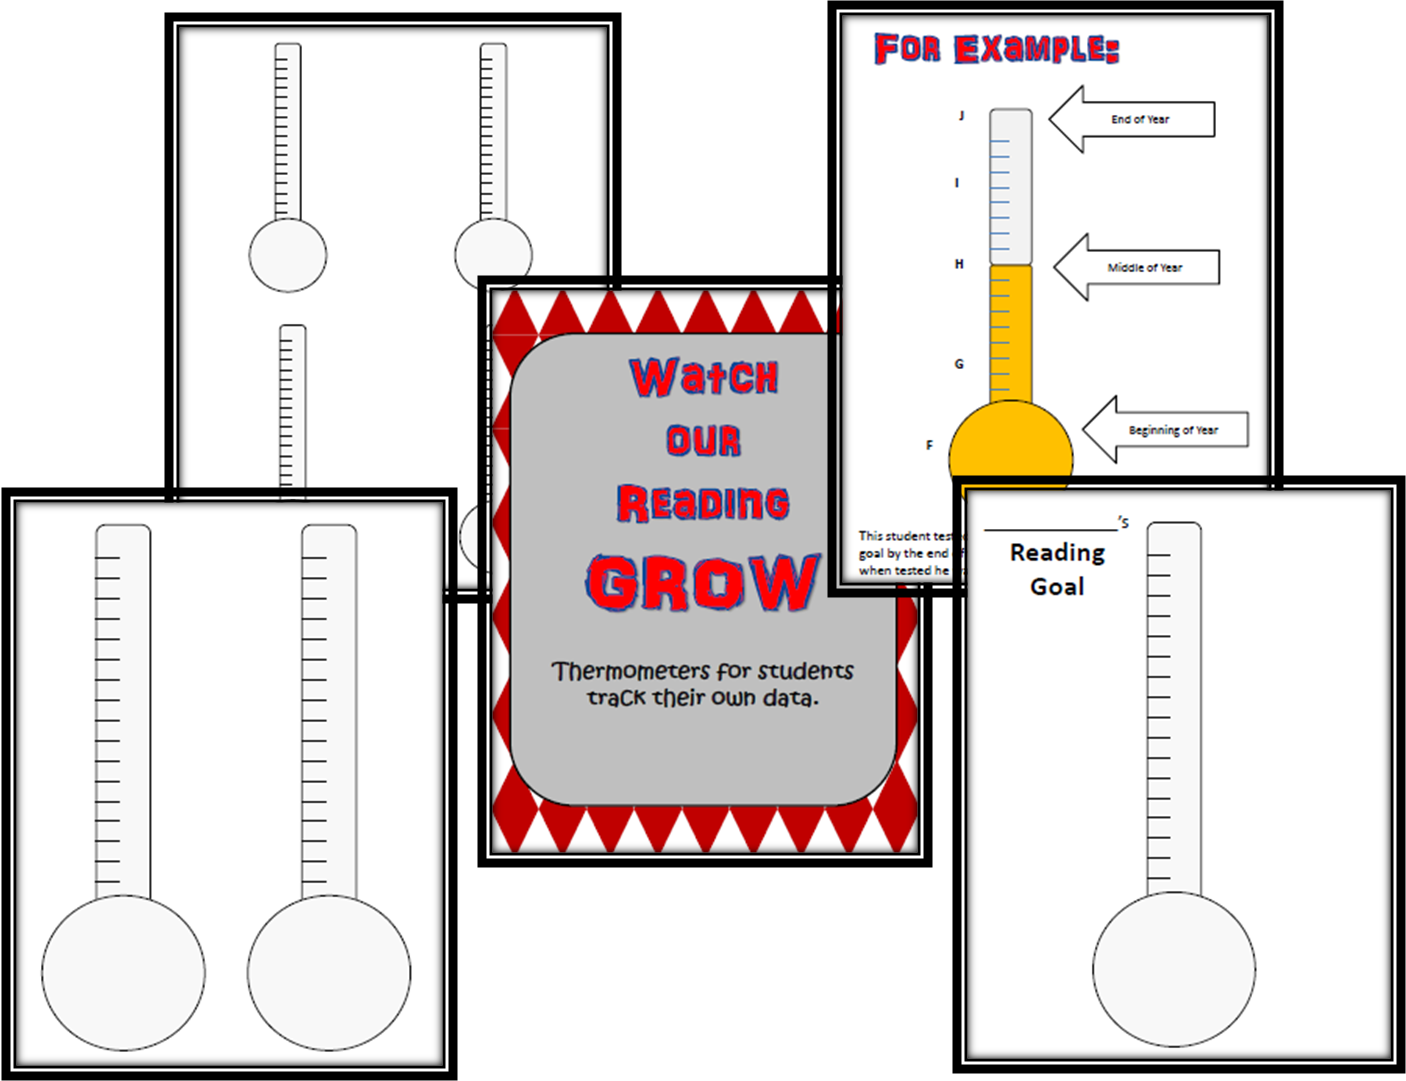 http://www.teacherspayteachers.com/Product/Student-Growth-Thermometer-Charts-1098049